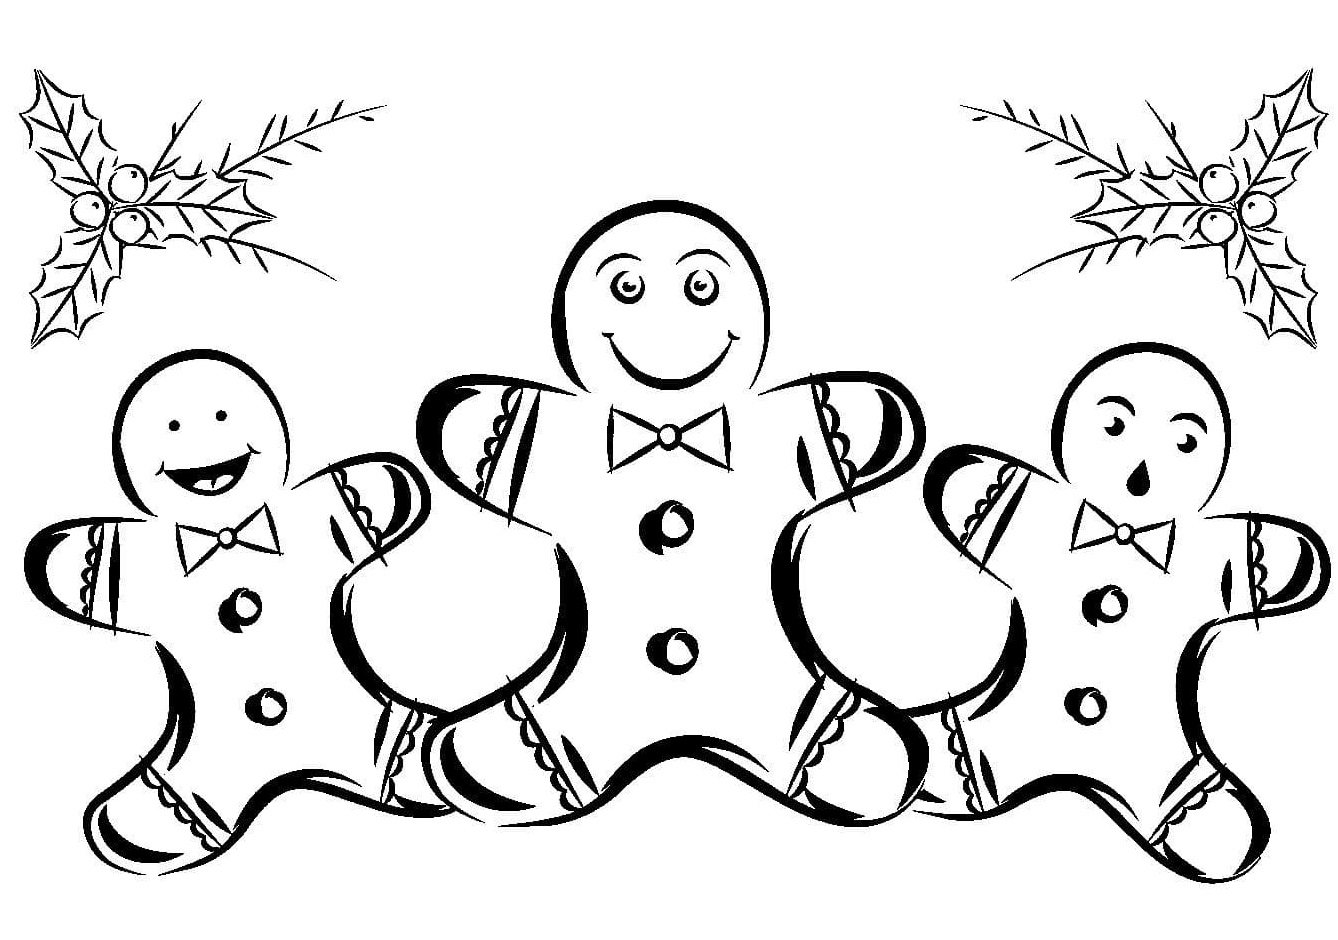 Three Gingerbread Men coloring page